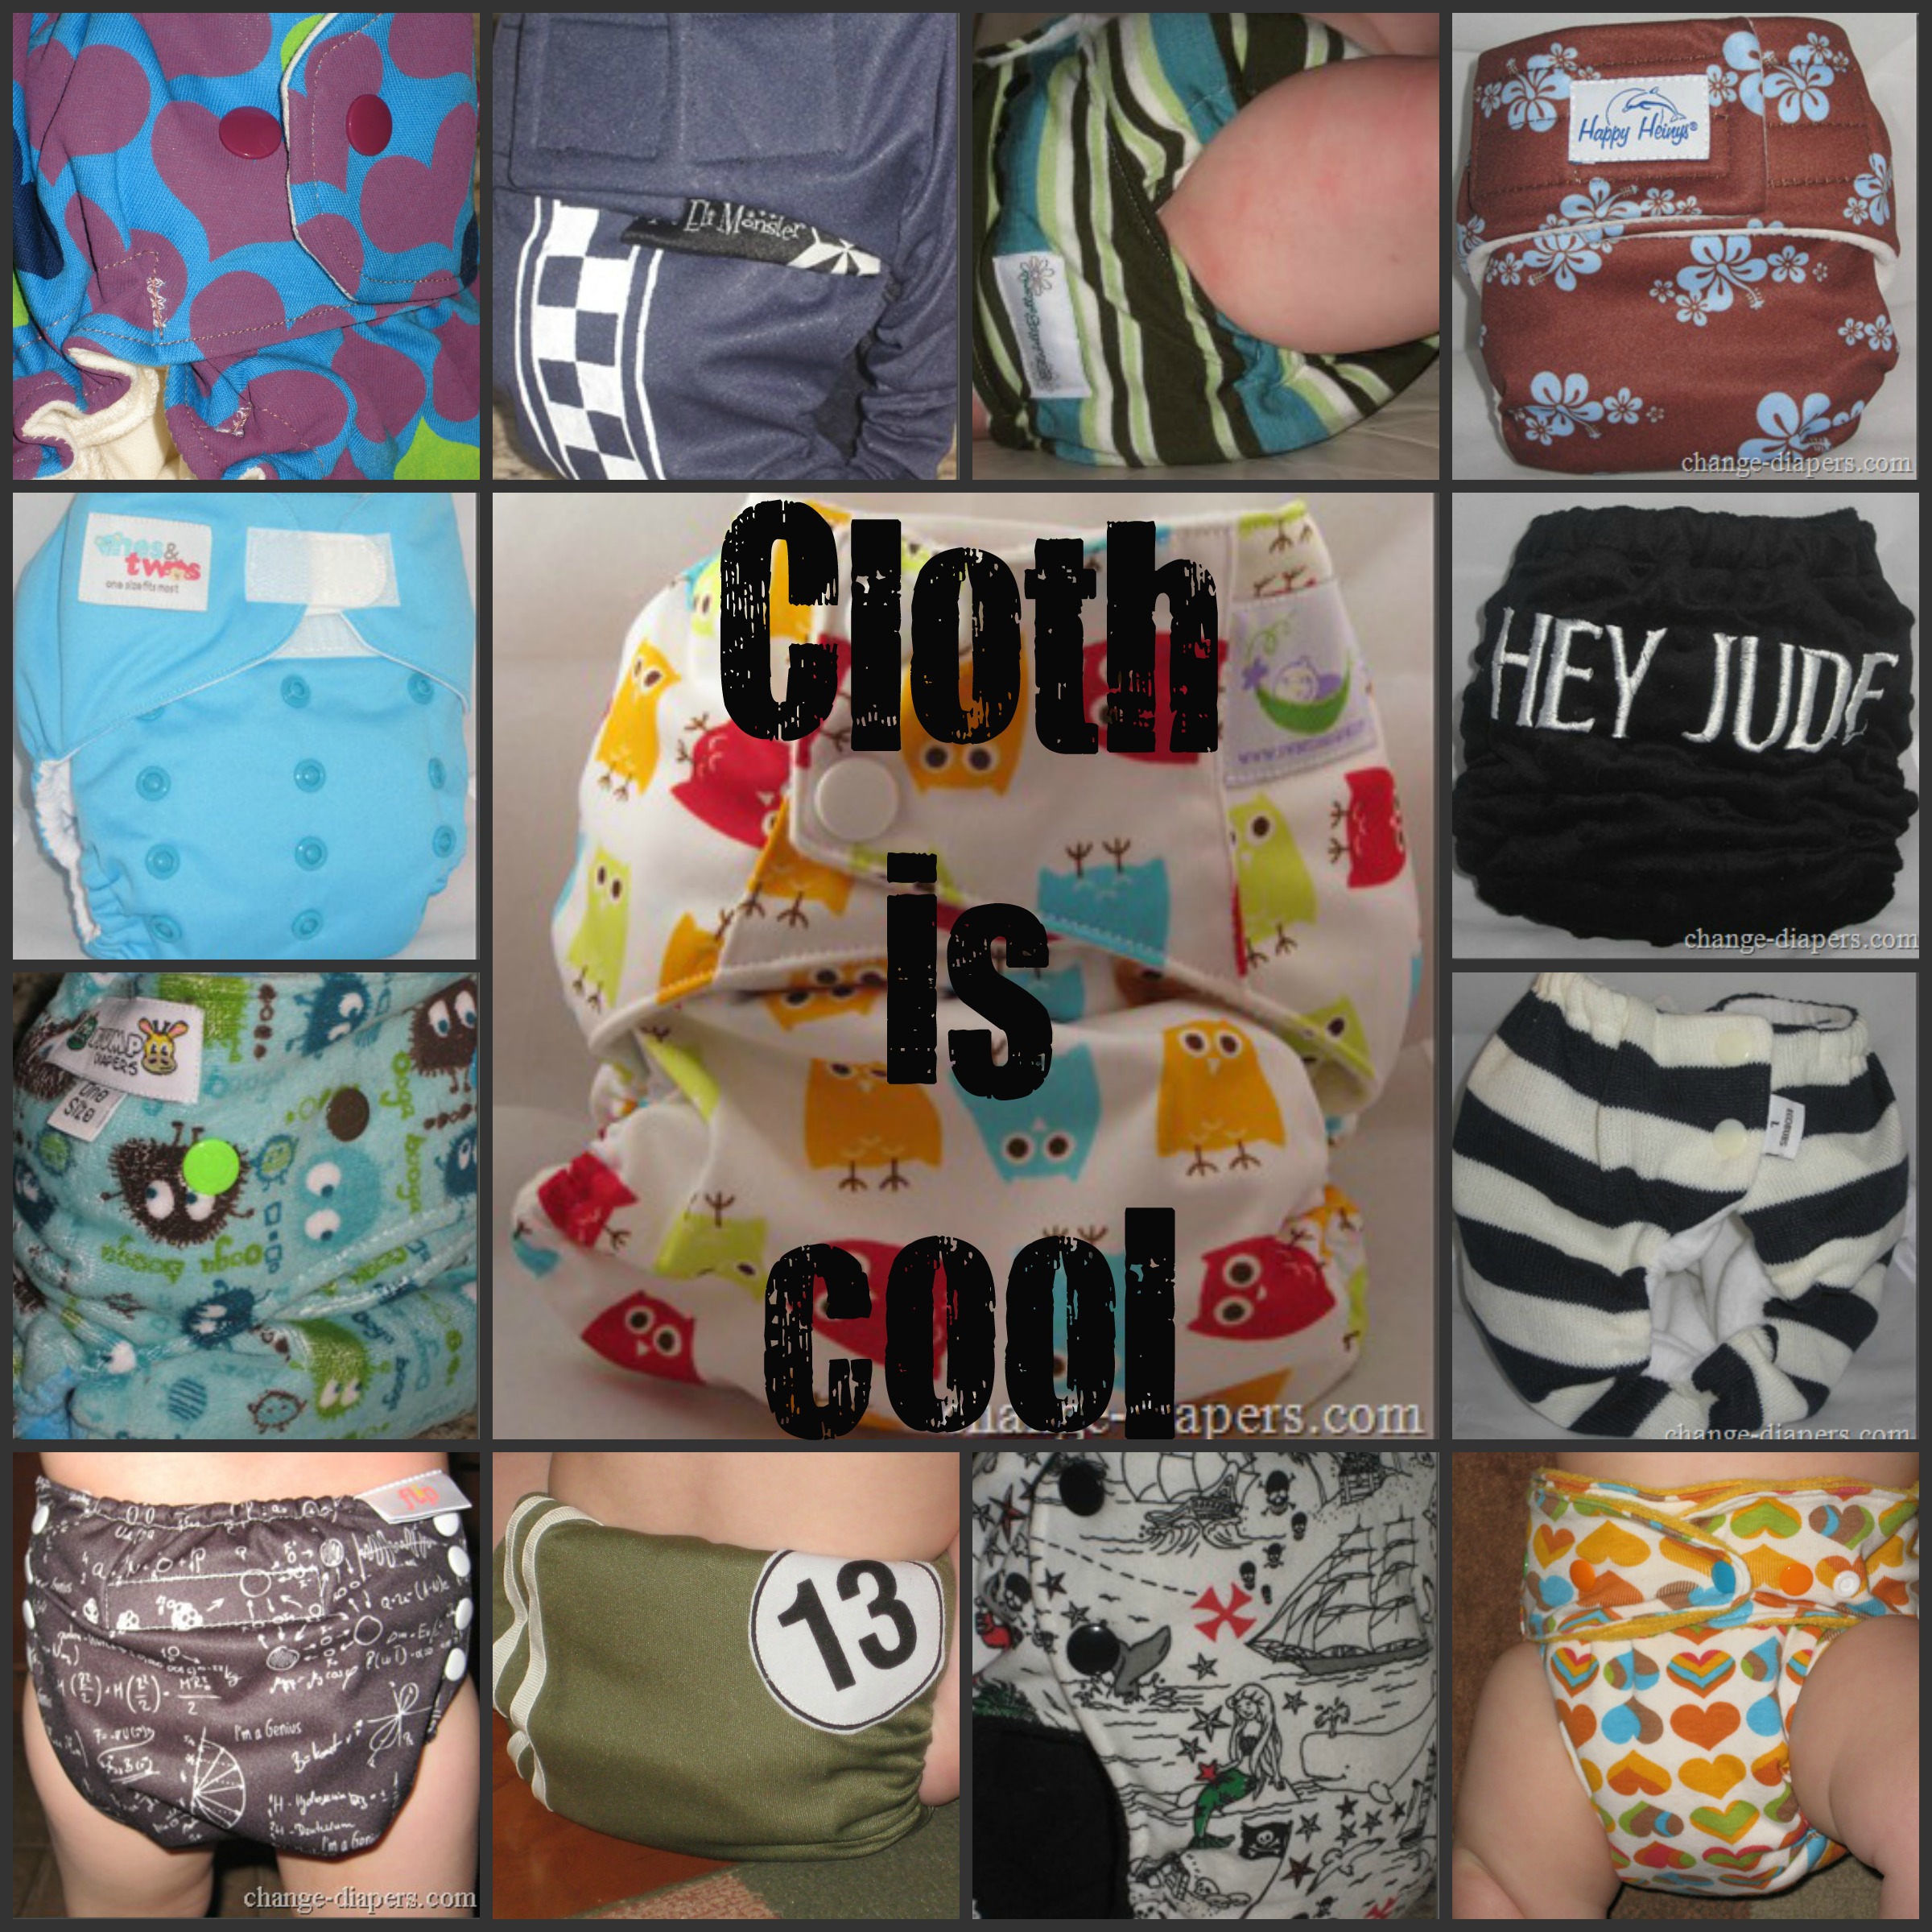 cloth is cool